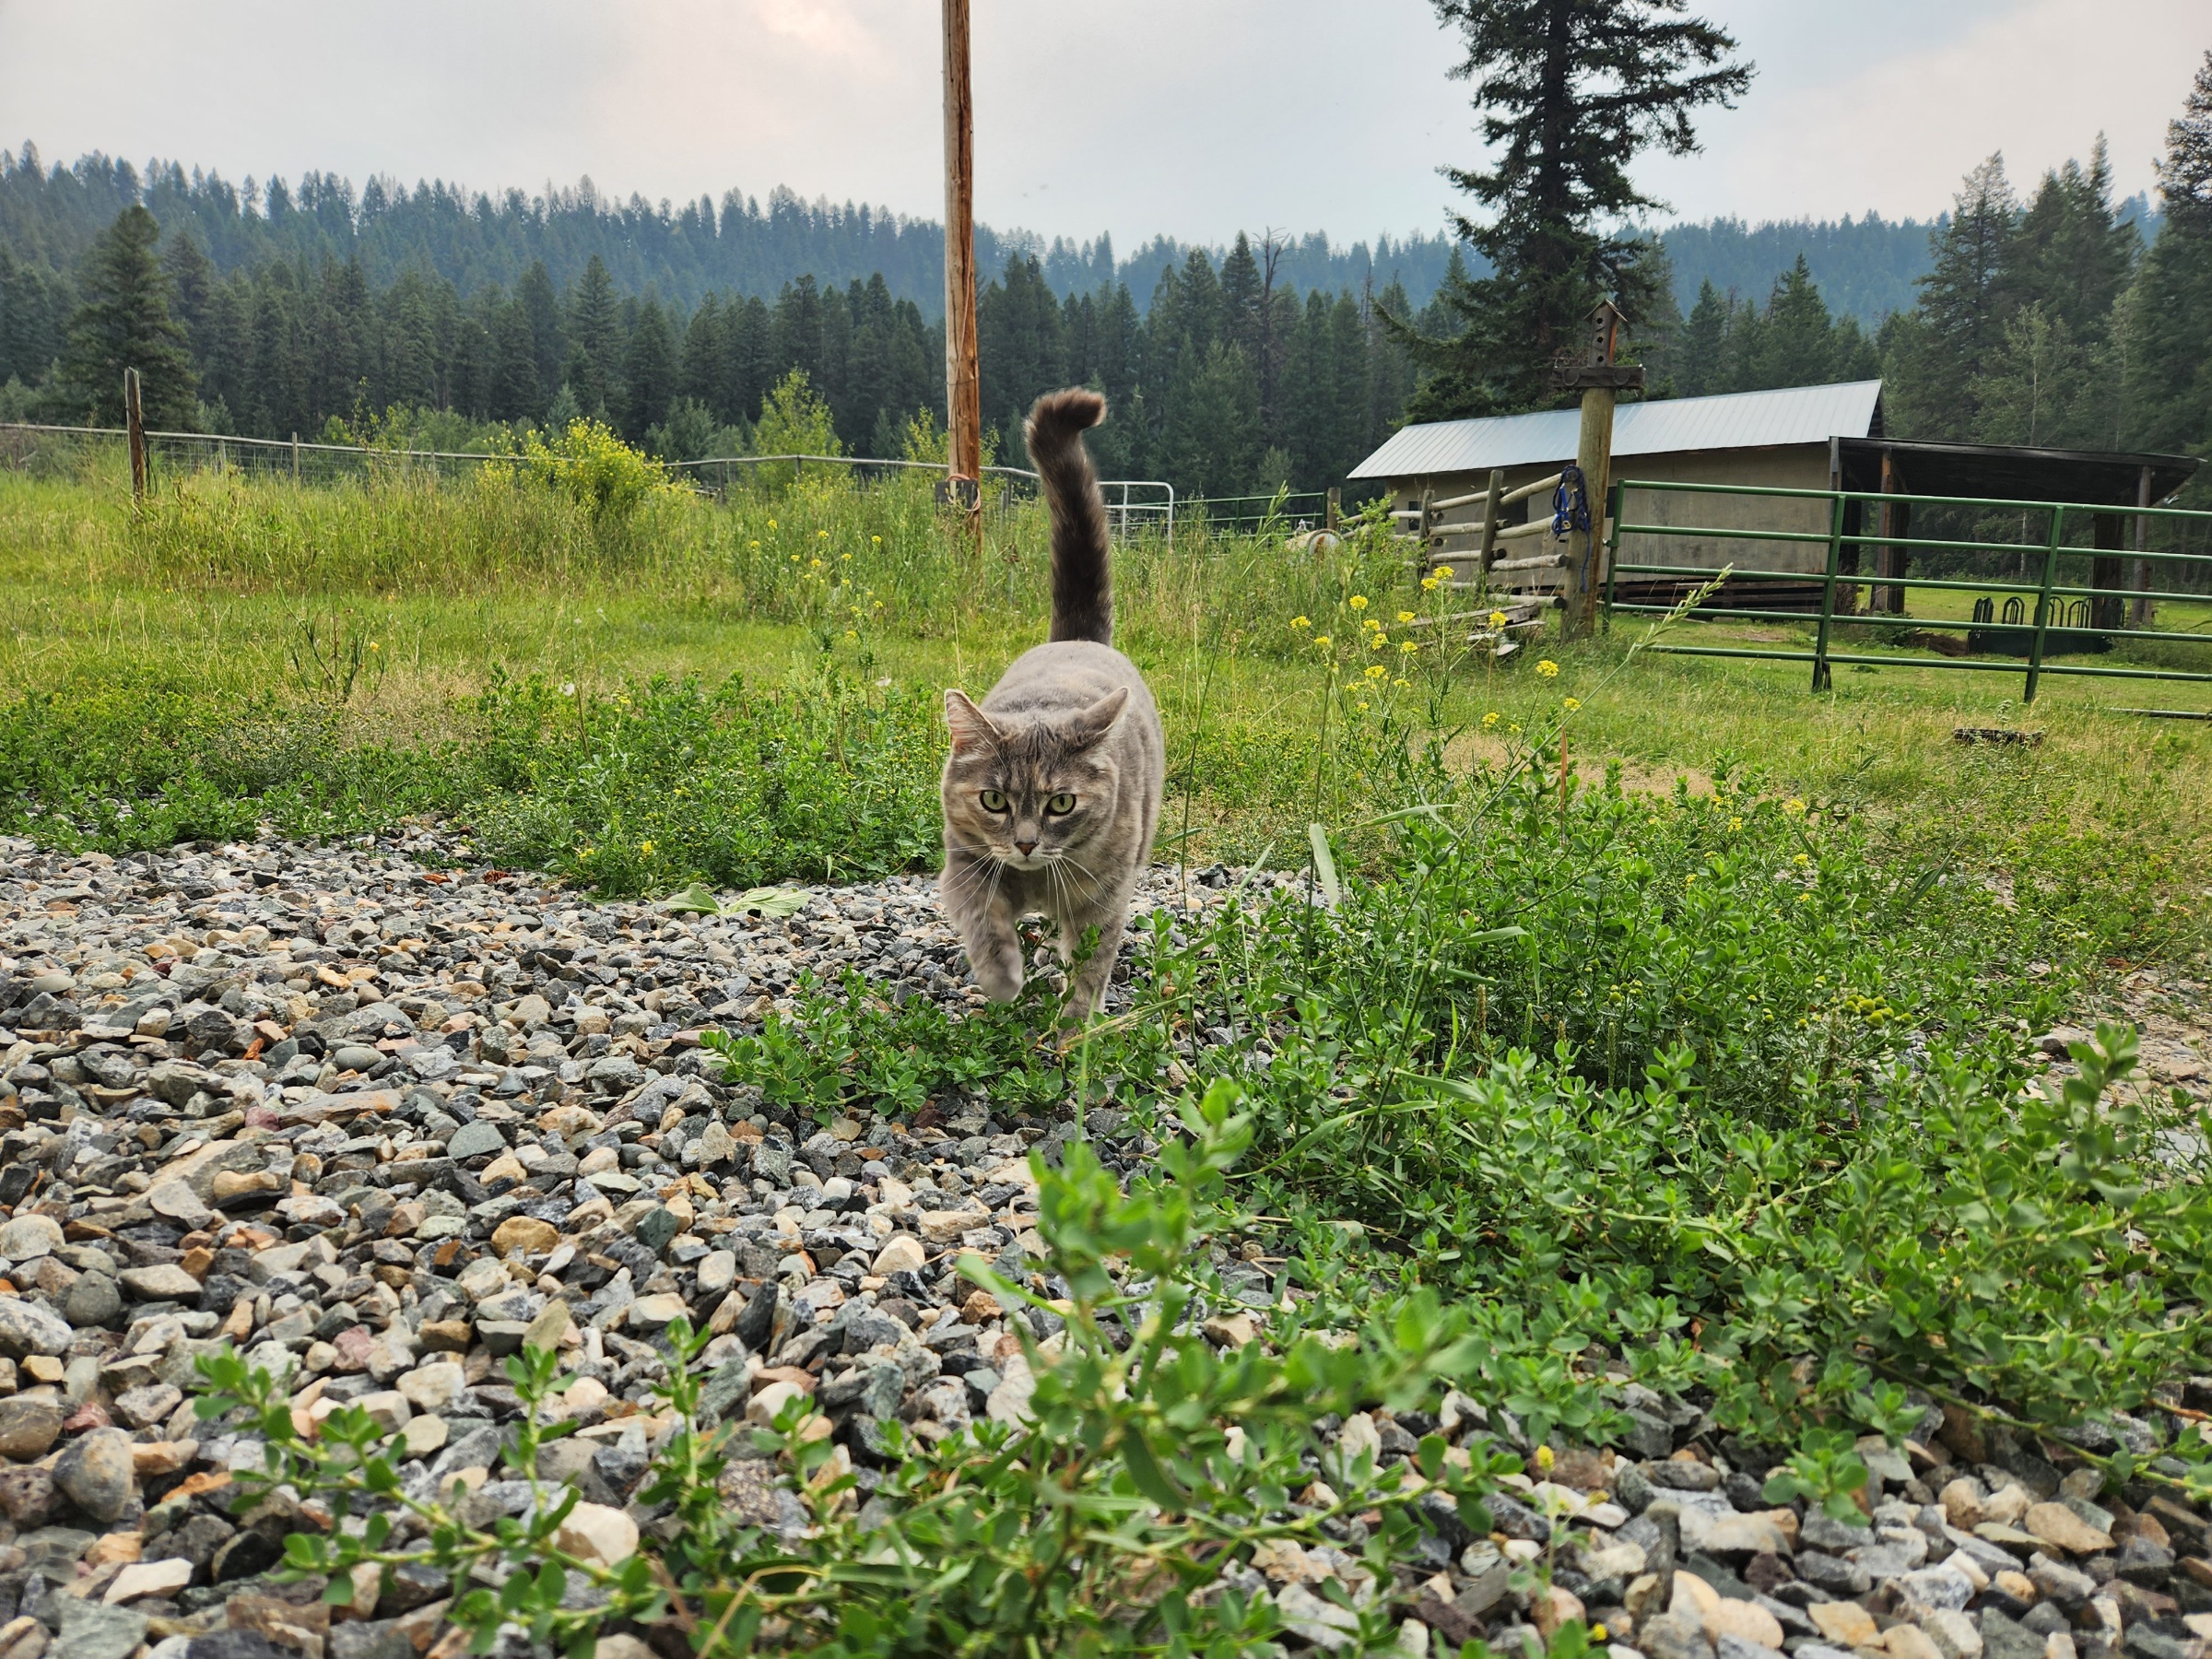 photo of a grey cat stalking toward the foreground, across grass and gravel, a barn in the background